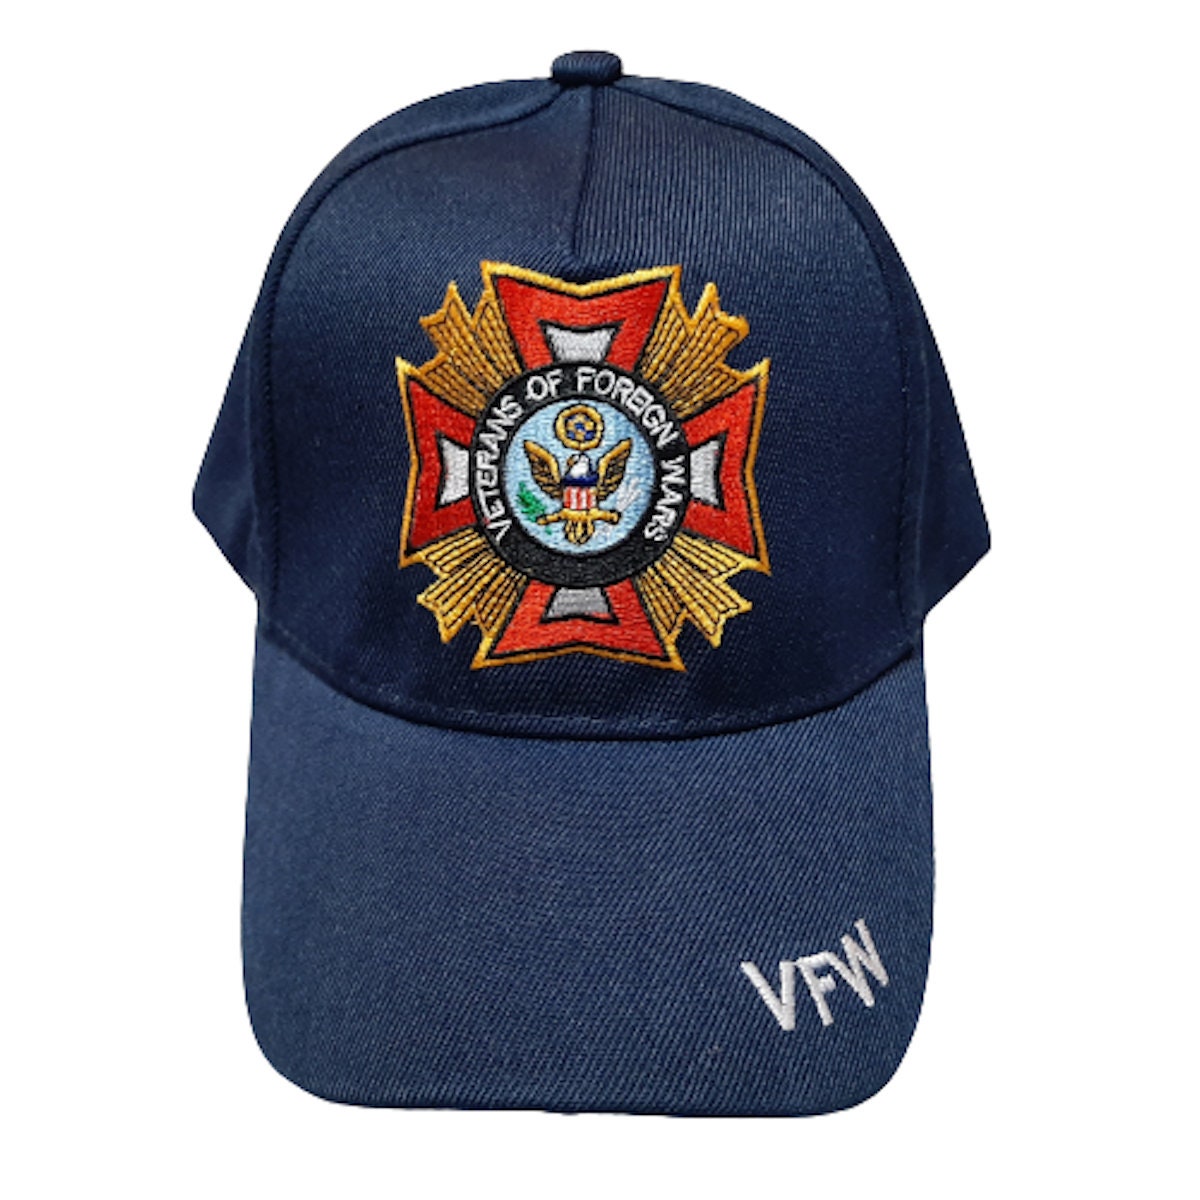 VFW Veterans Of Foreign Wars Baseball Cap Hat Mens One Size Adjustable Blue